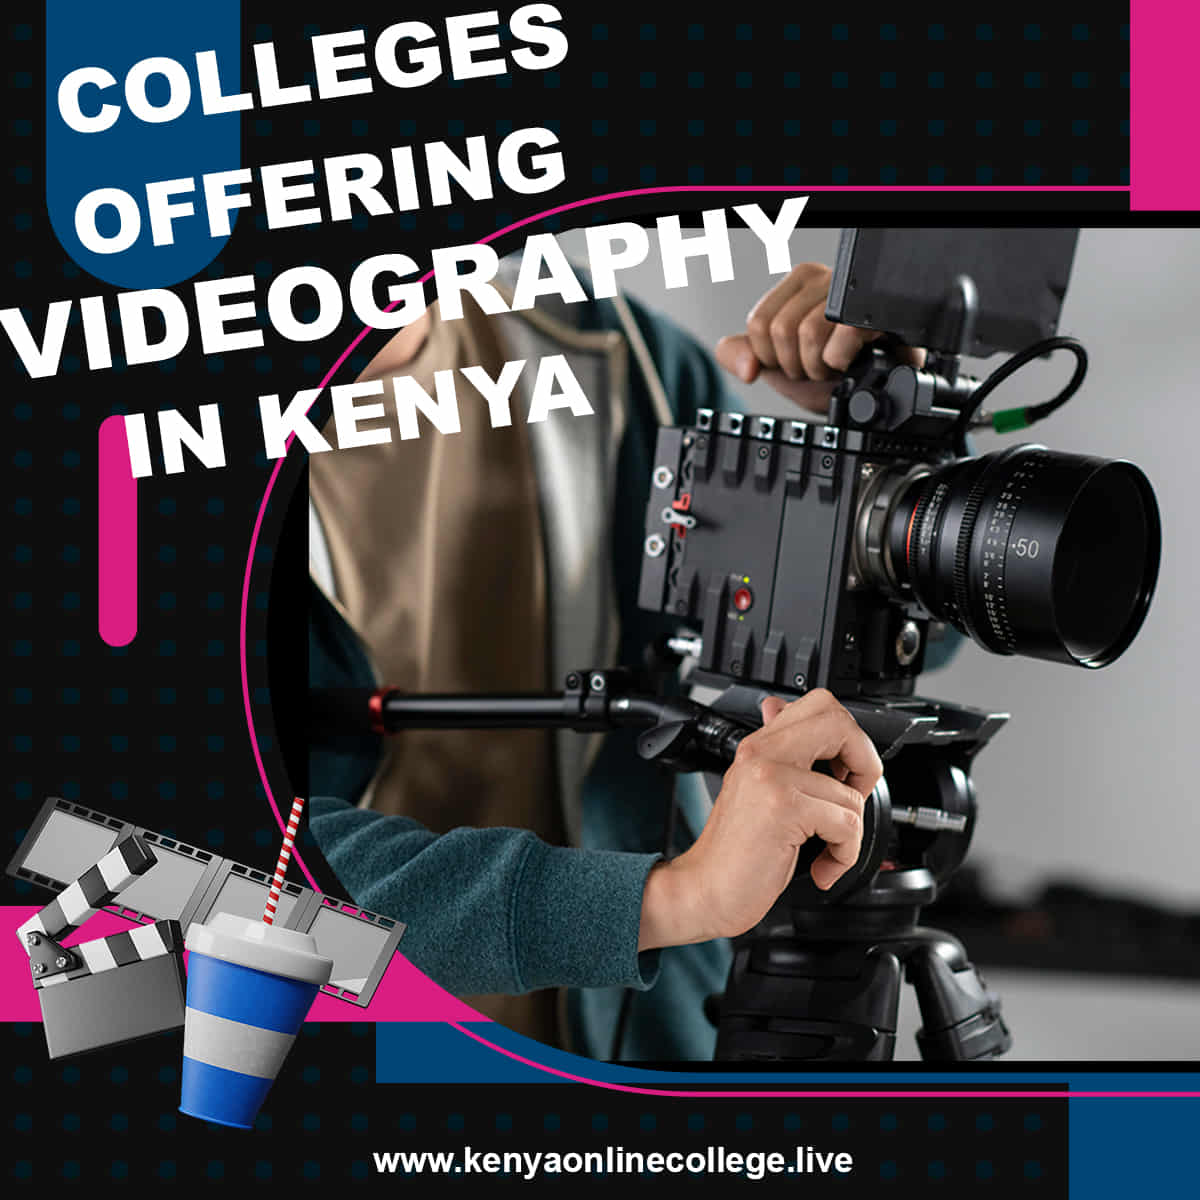 Colleges offering videography in Kenya